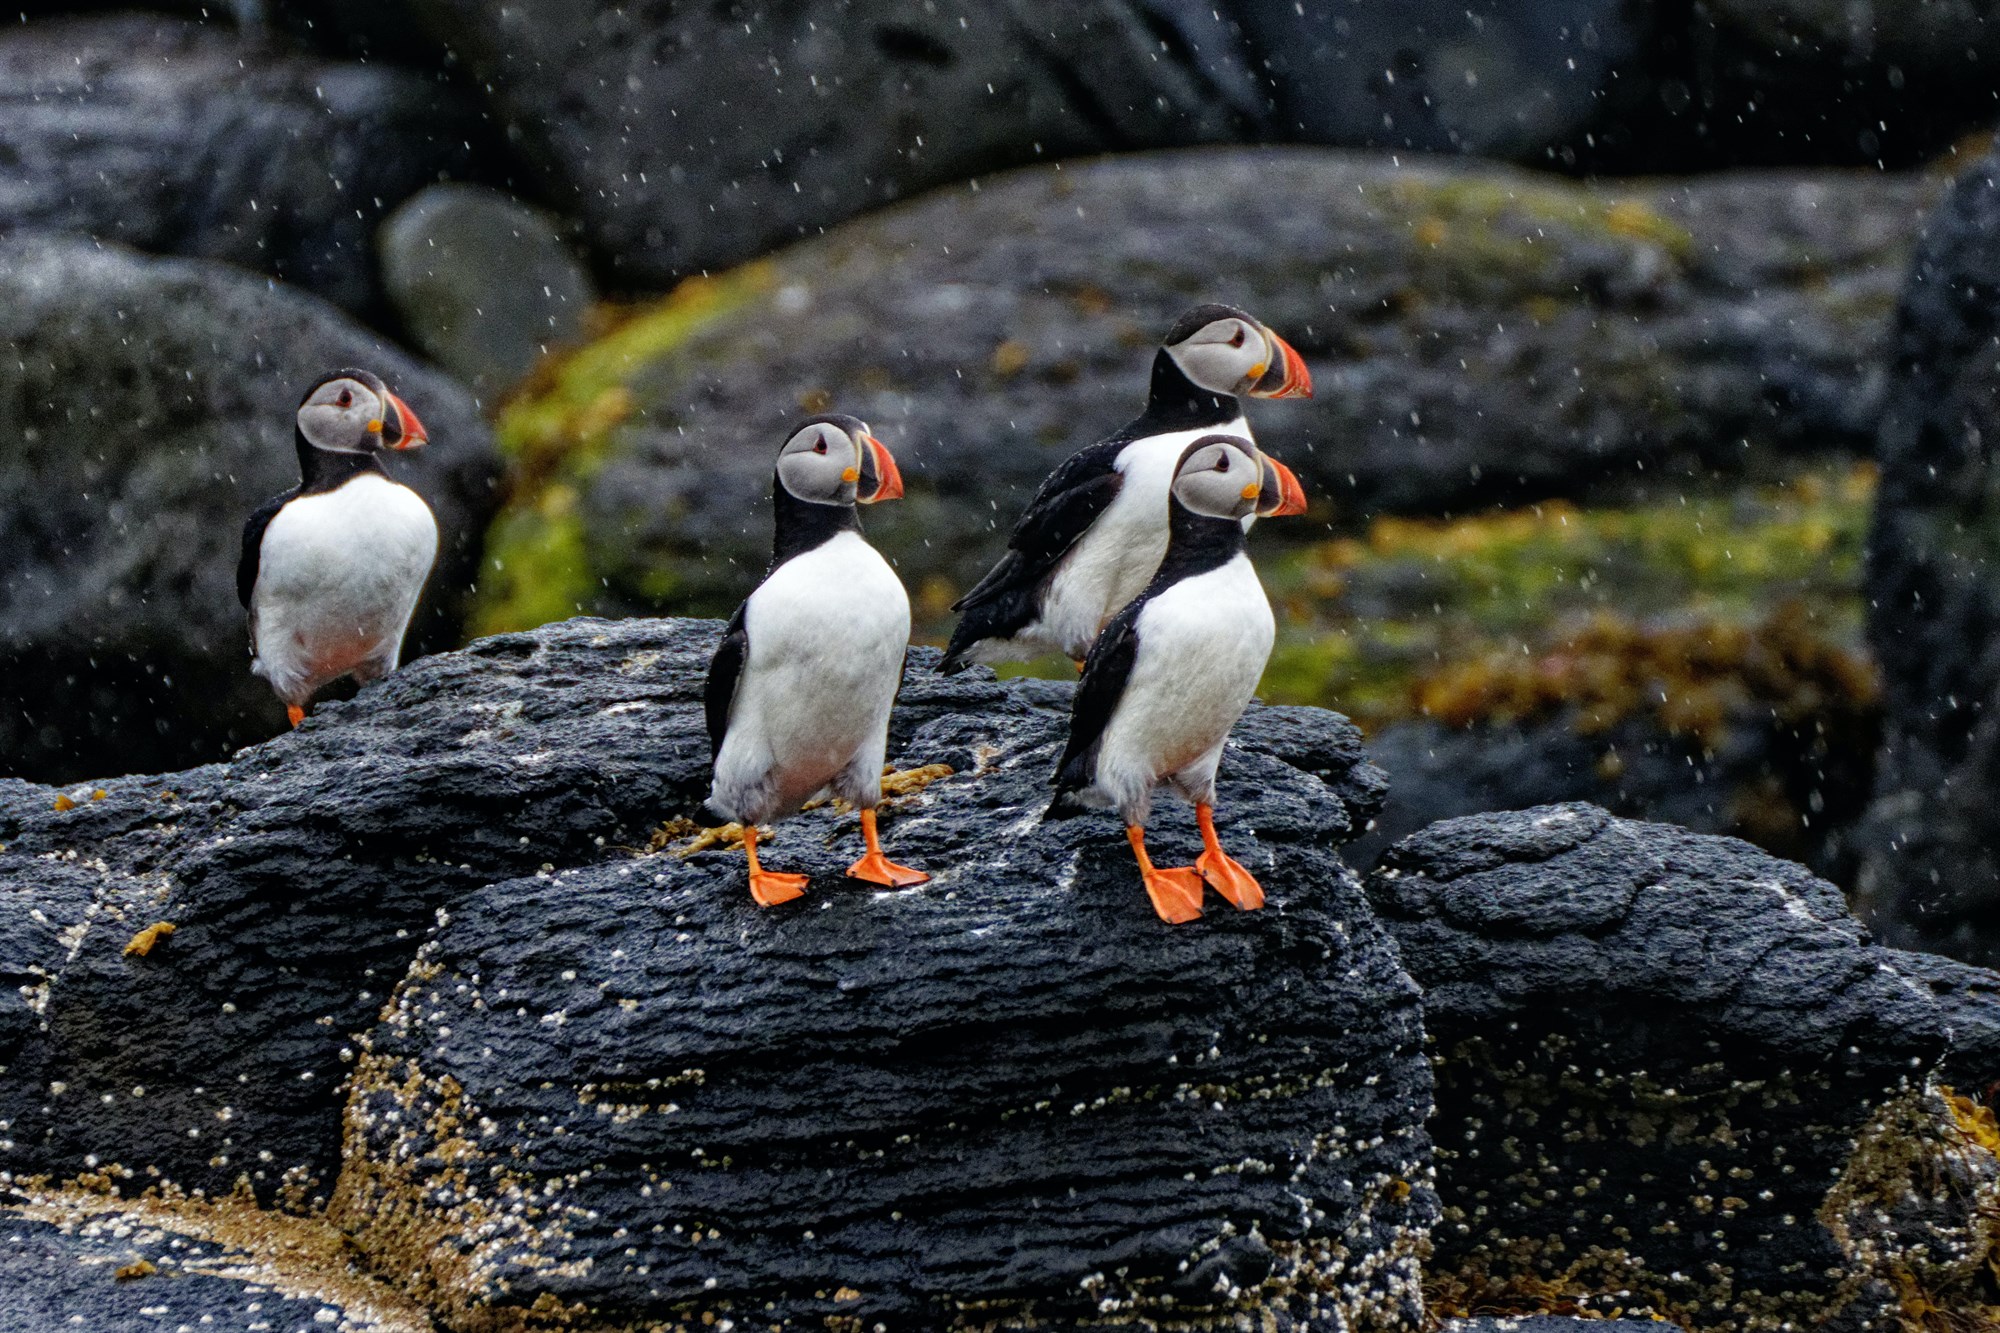  Puffins in the rain on Iceland shores.